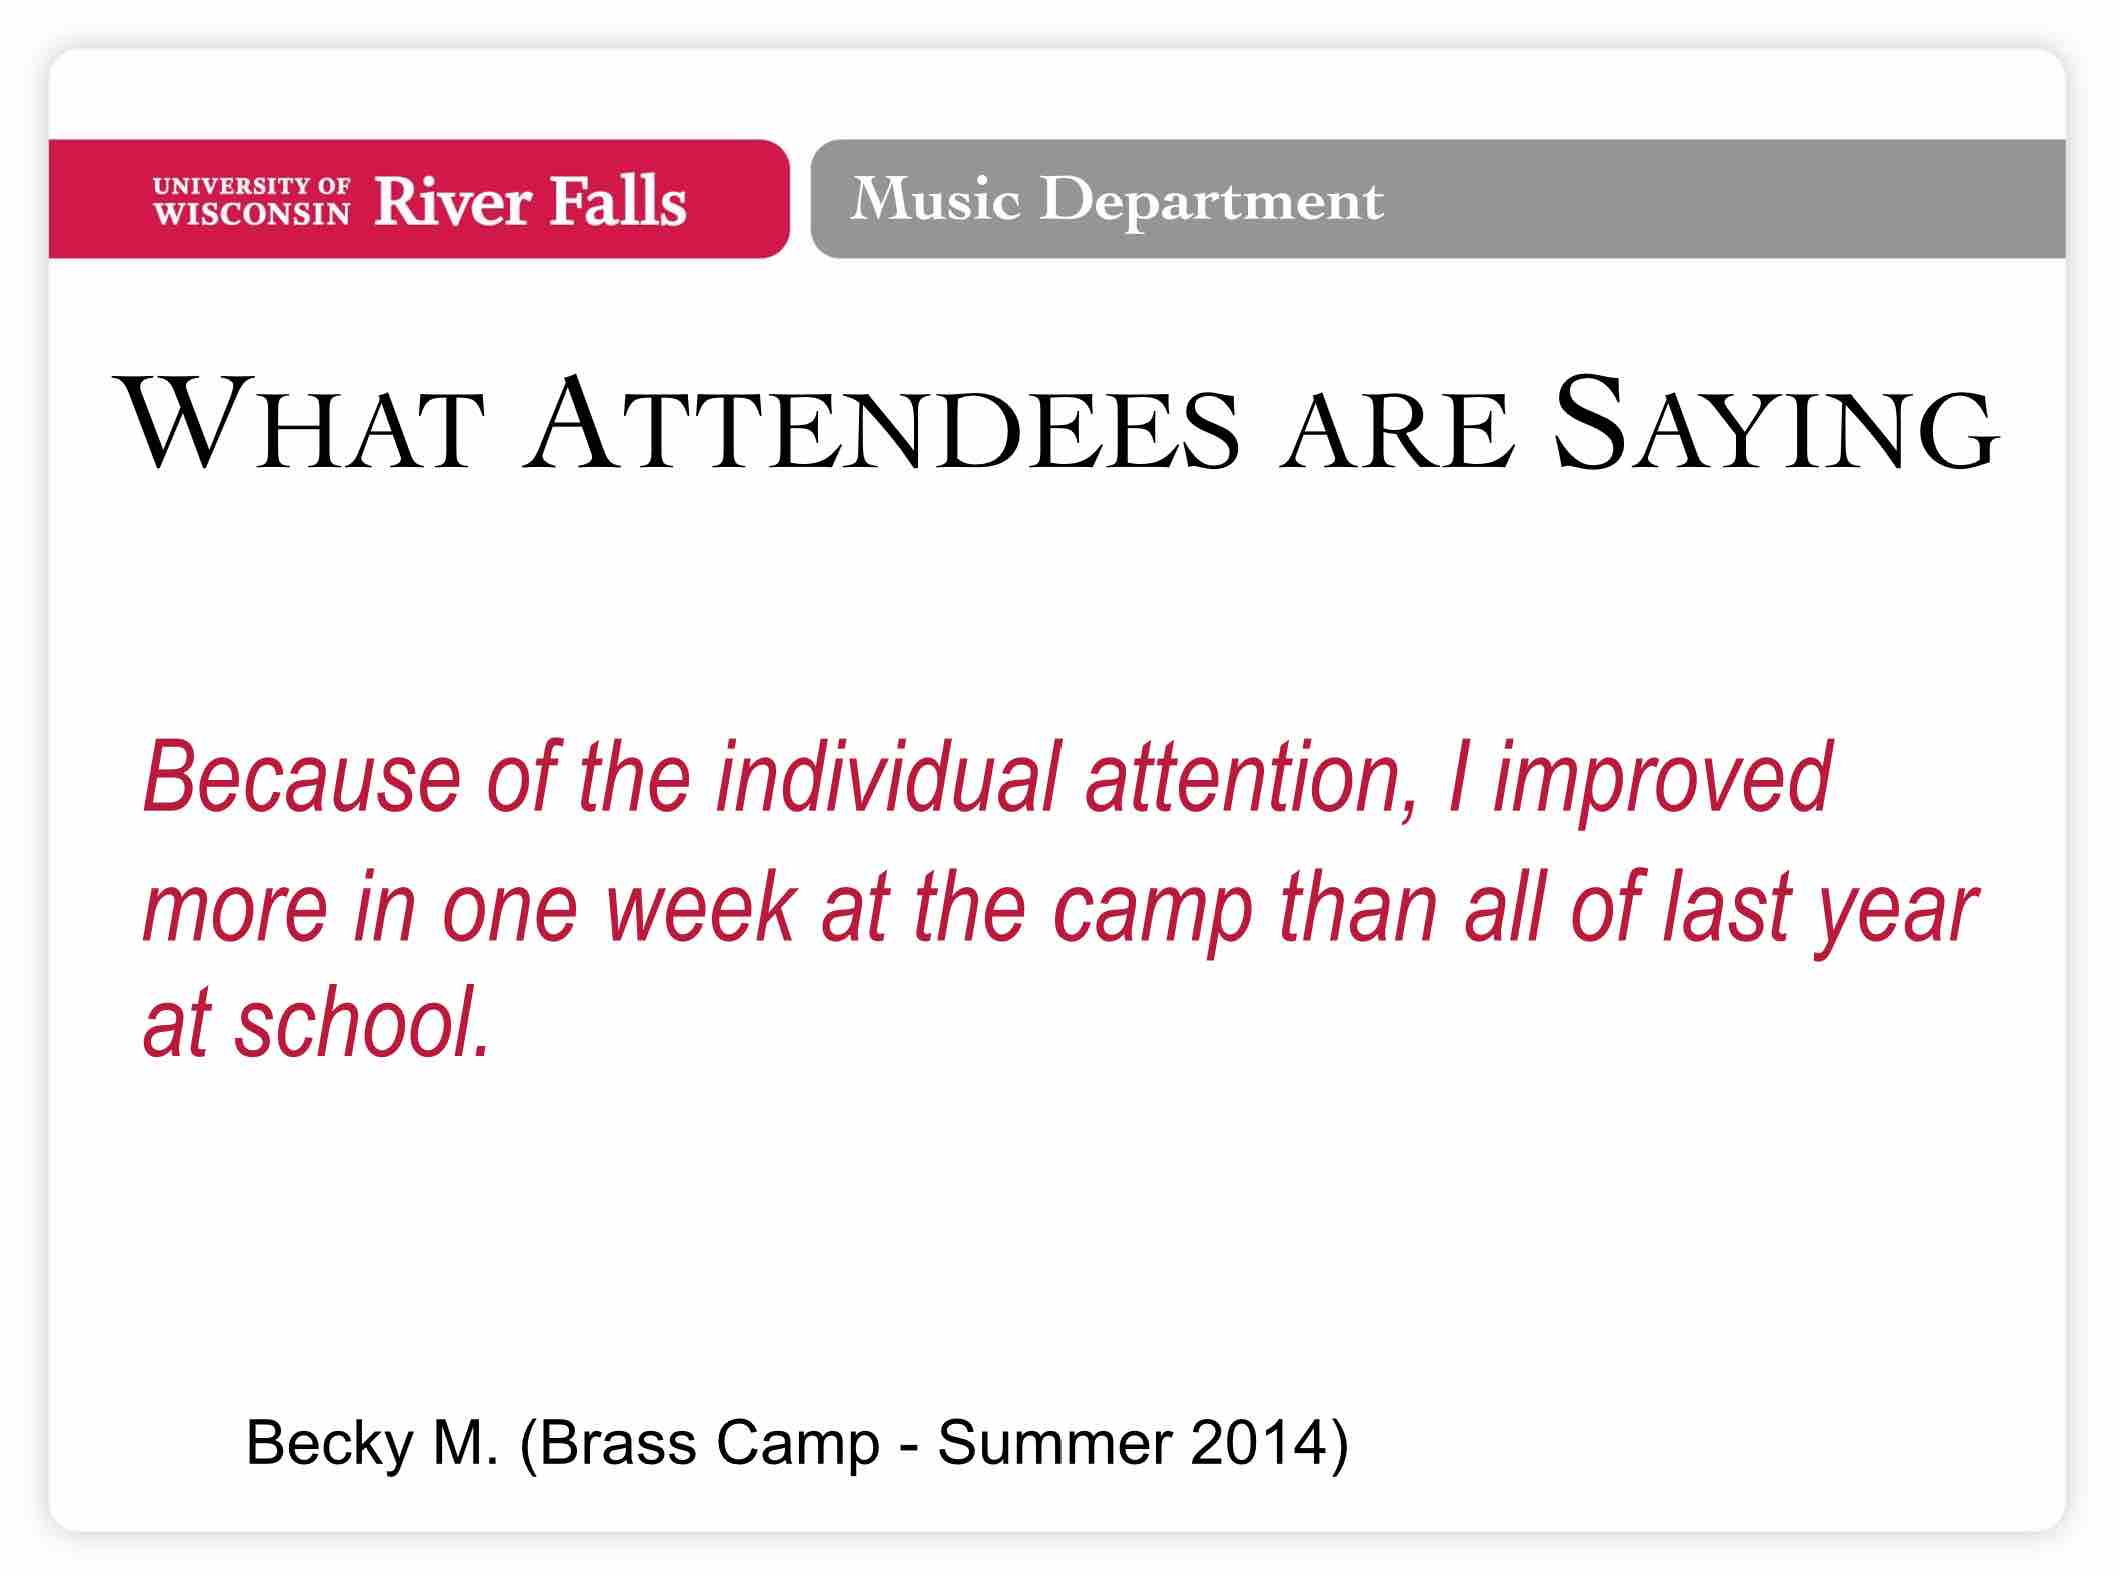 Quote - Brass Camp